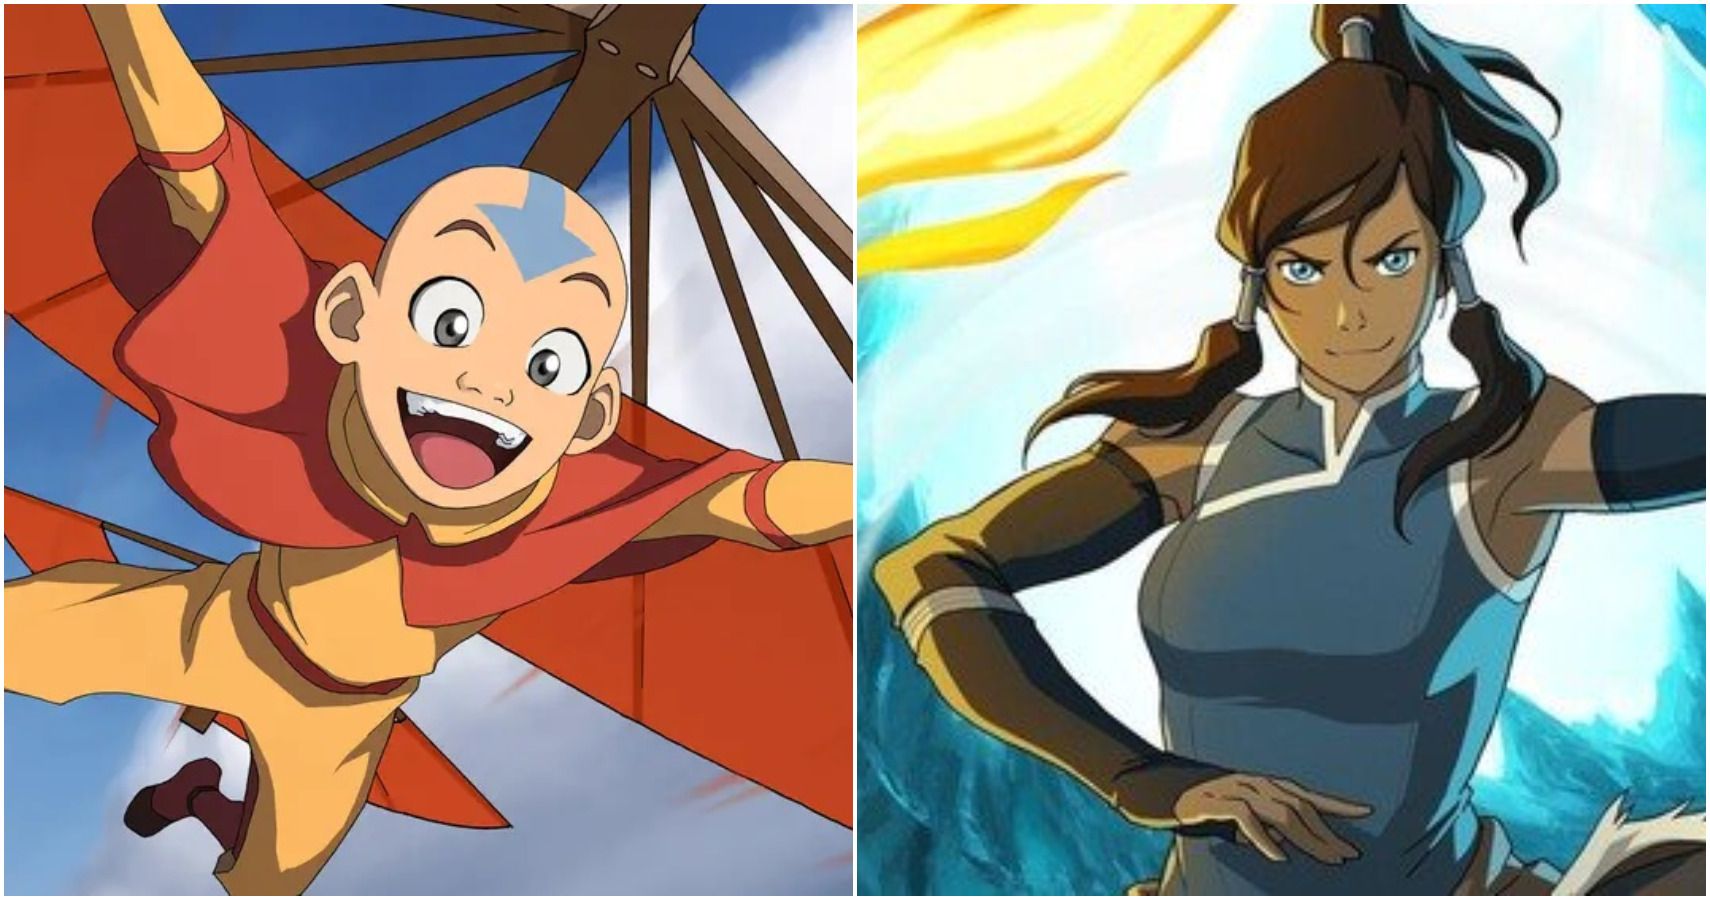 The Earthbending Avatar After Korra Explained Canon Avatar the Last  Airbender Explained  YouTube